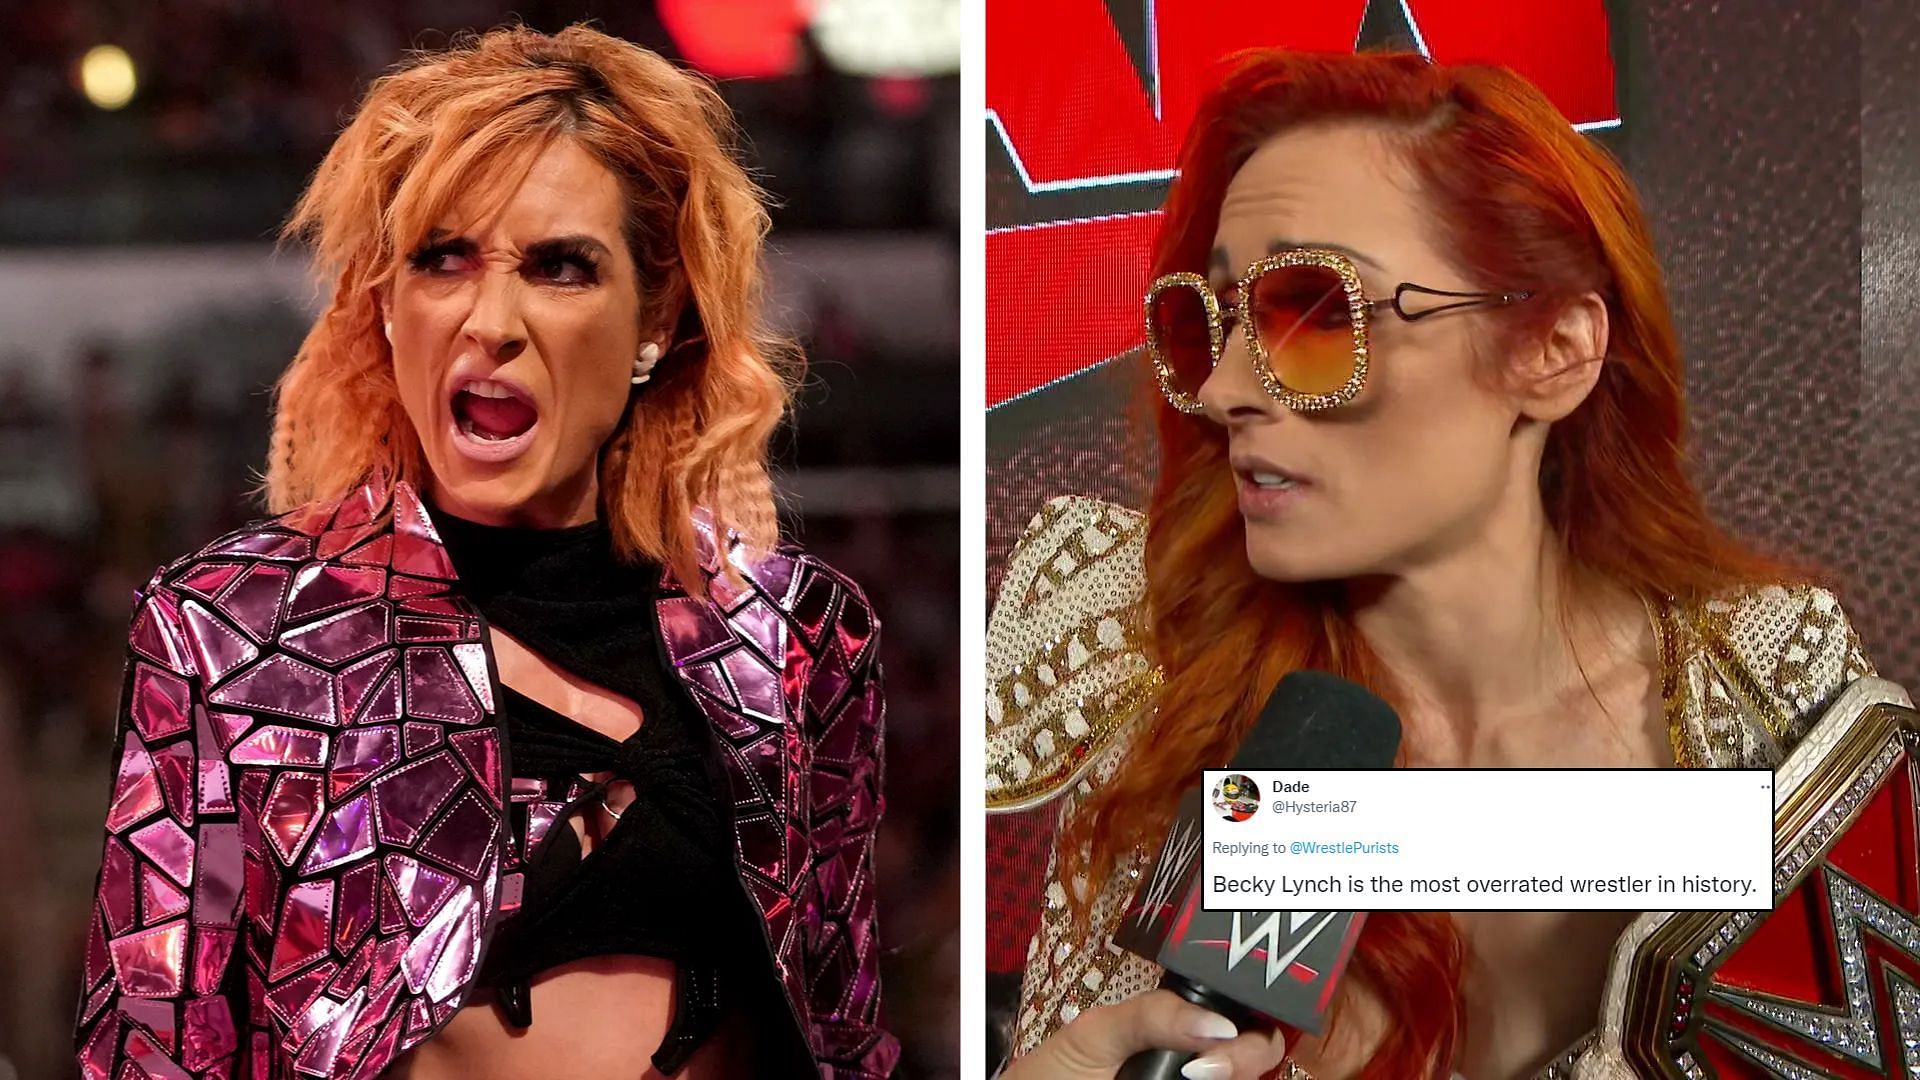 Some WWE fans are critical of the incredibly talented Becky Lynch